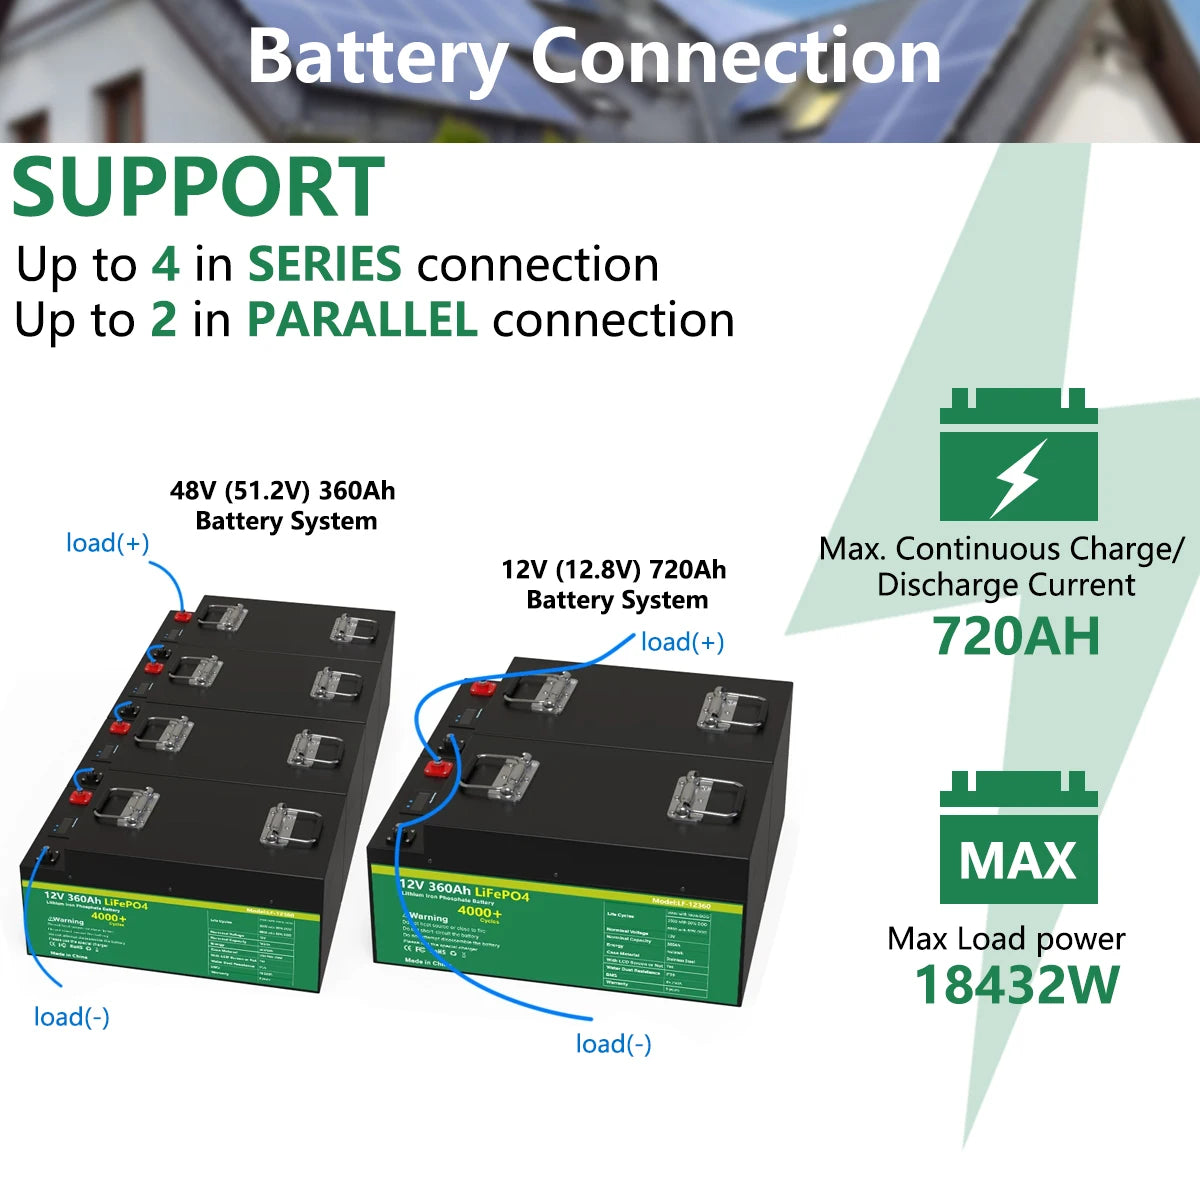 LiFePo4 Battery, 48V 360Ah battery pack with up to 4 series or 2 parallel connections and high power handling.